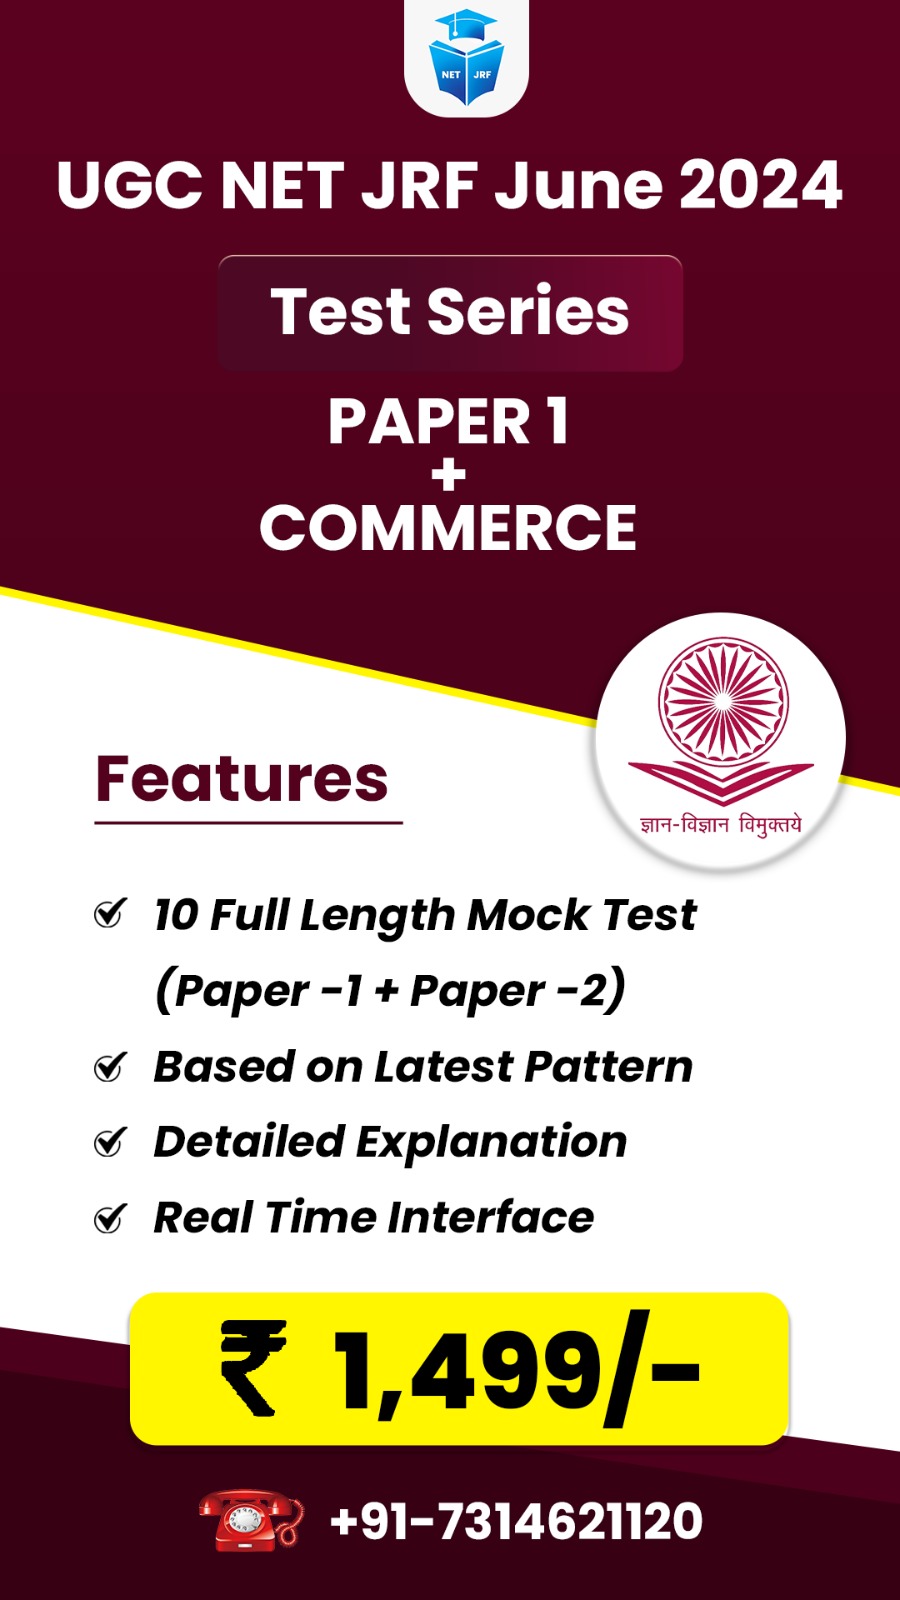 Commerce (Paper 1 + Paper 2) Test Series for June 2024